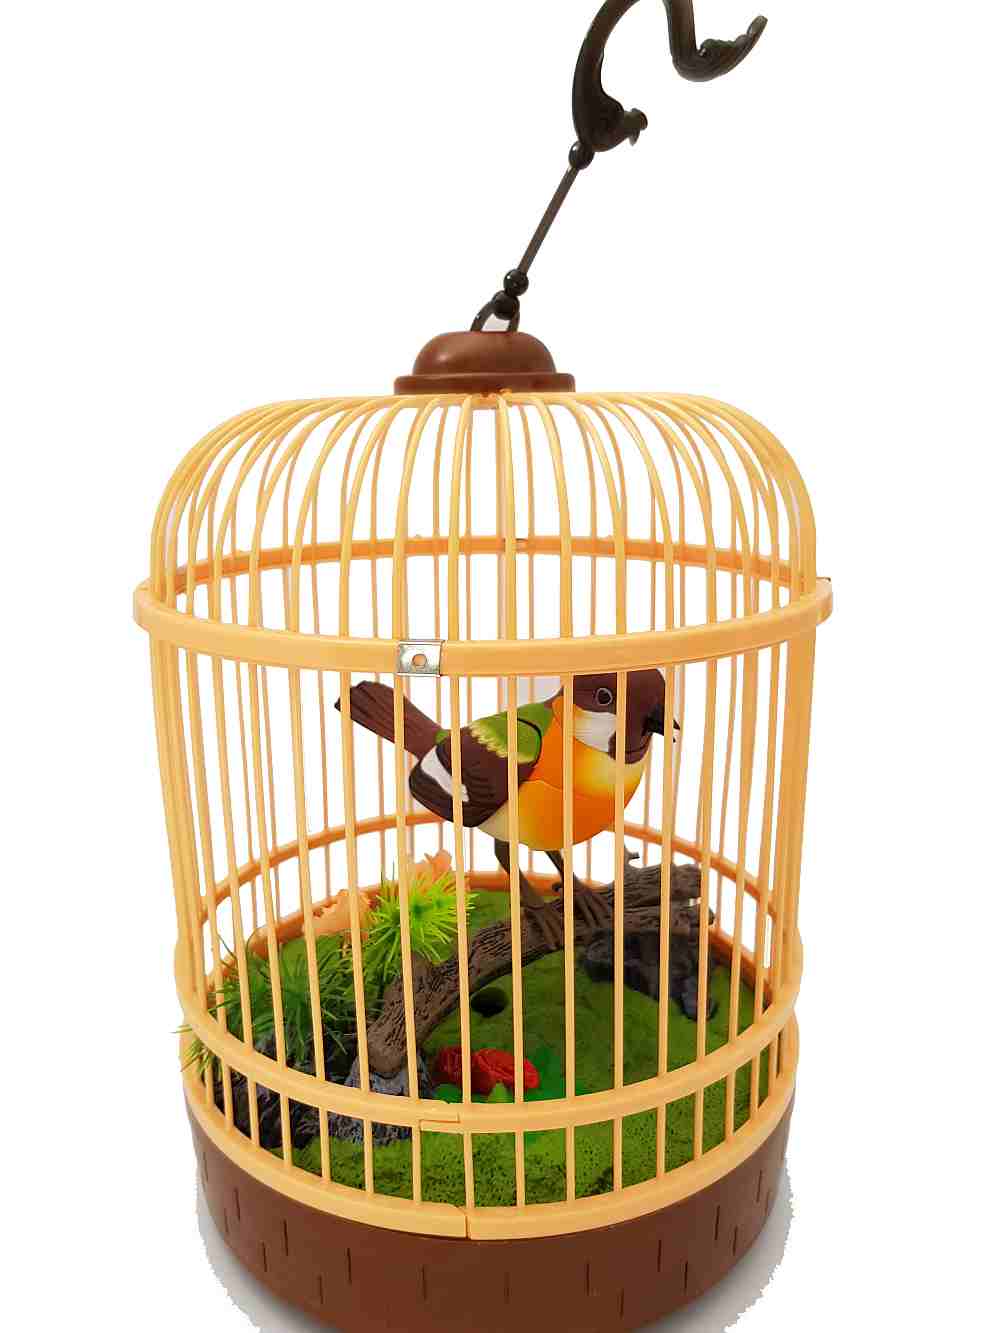 Sound Sensor Electric Noise-activated Bird Pets in the Cage Music Singing Bird Baby Toys Christmas Gift for Kids